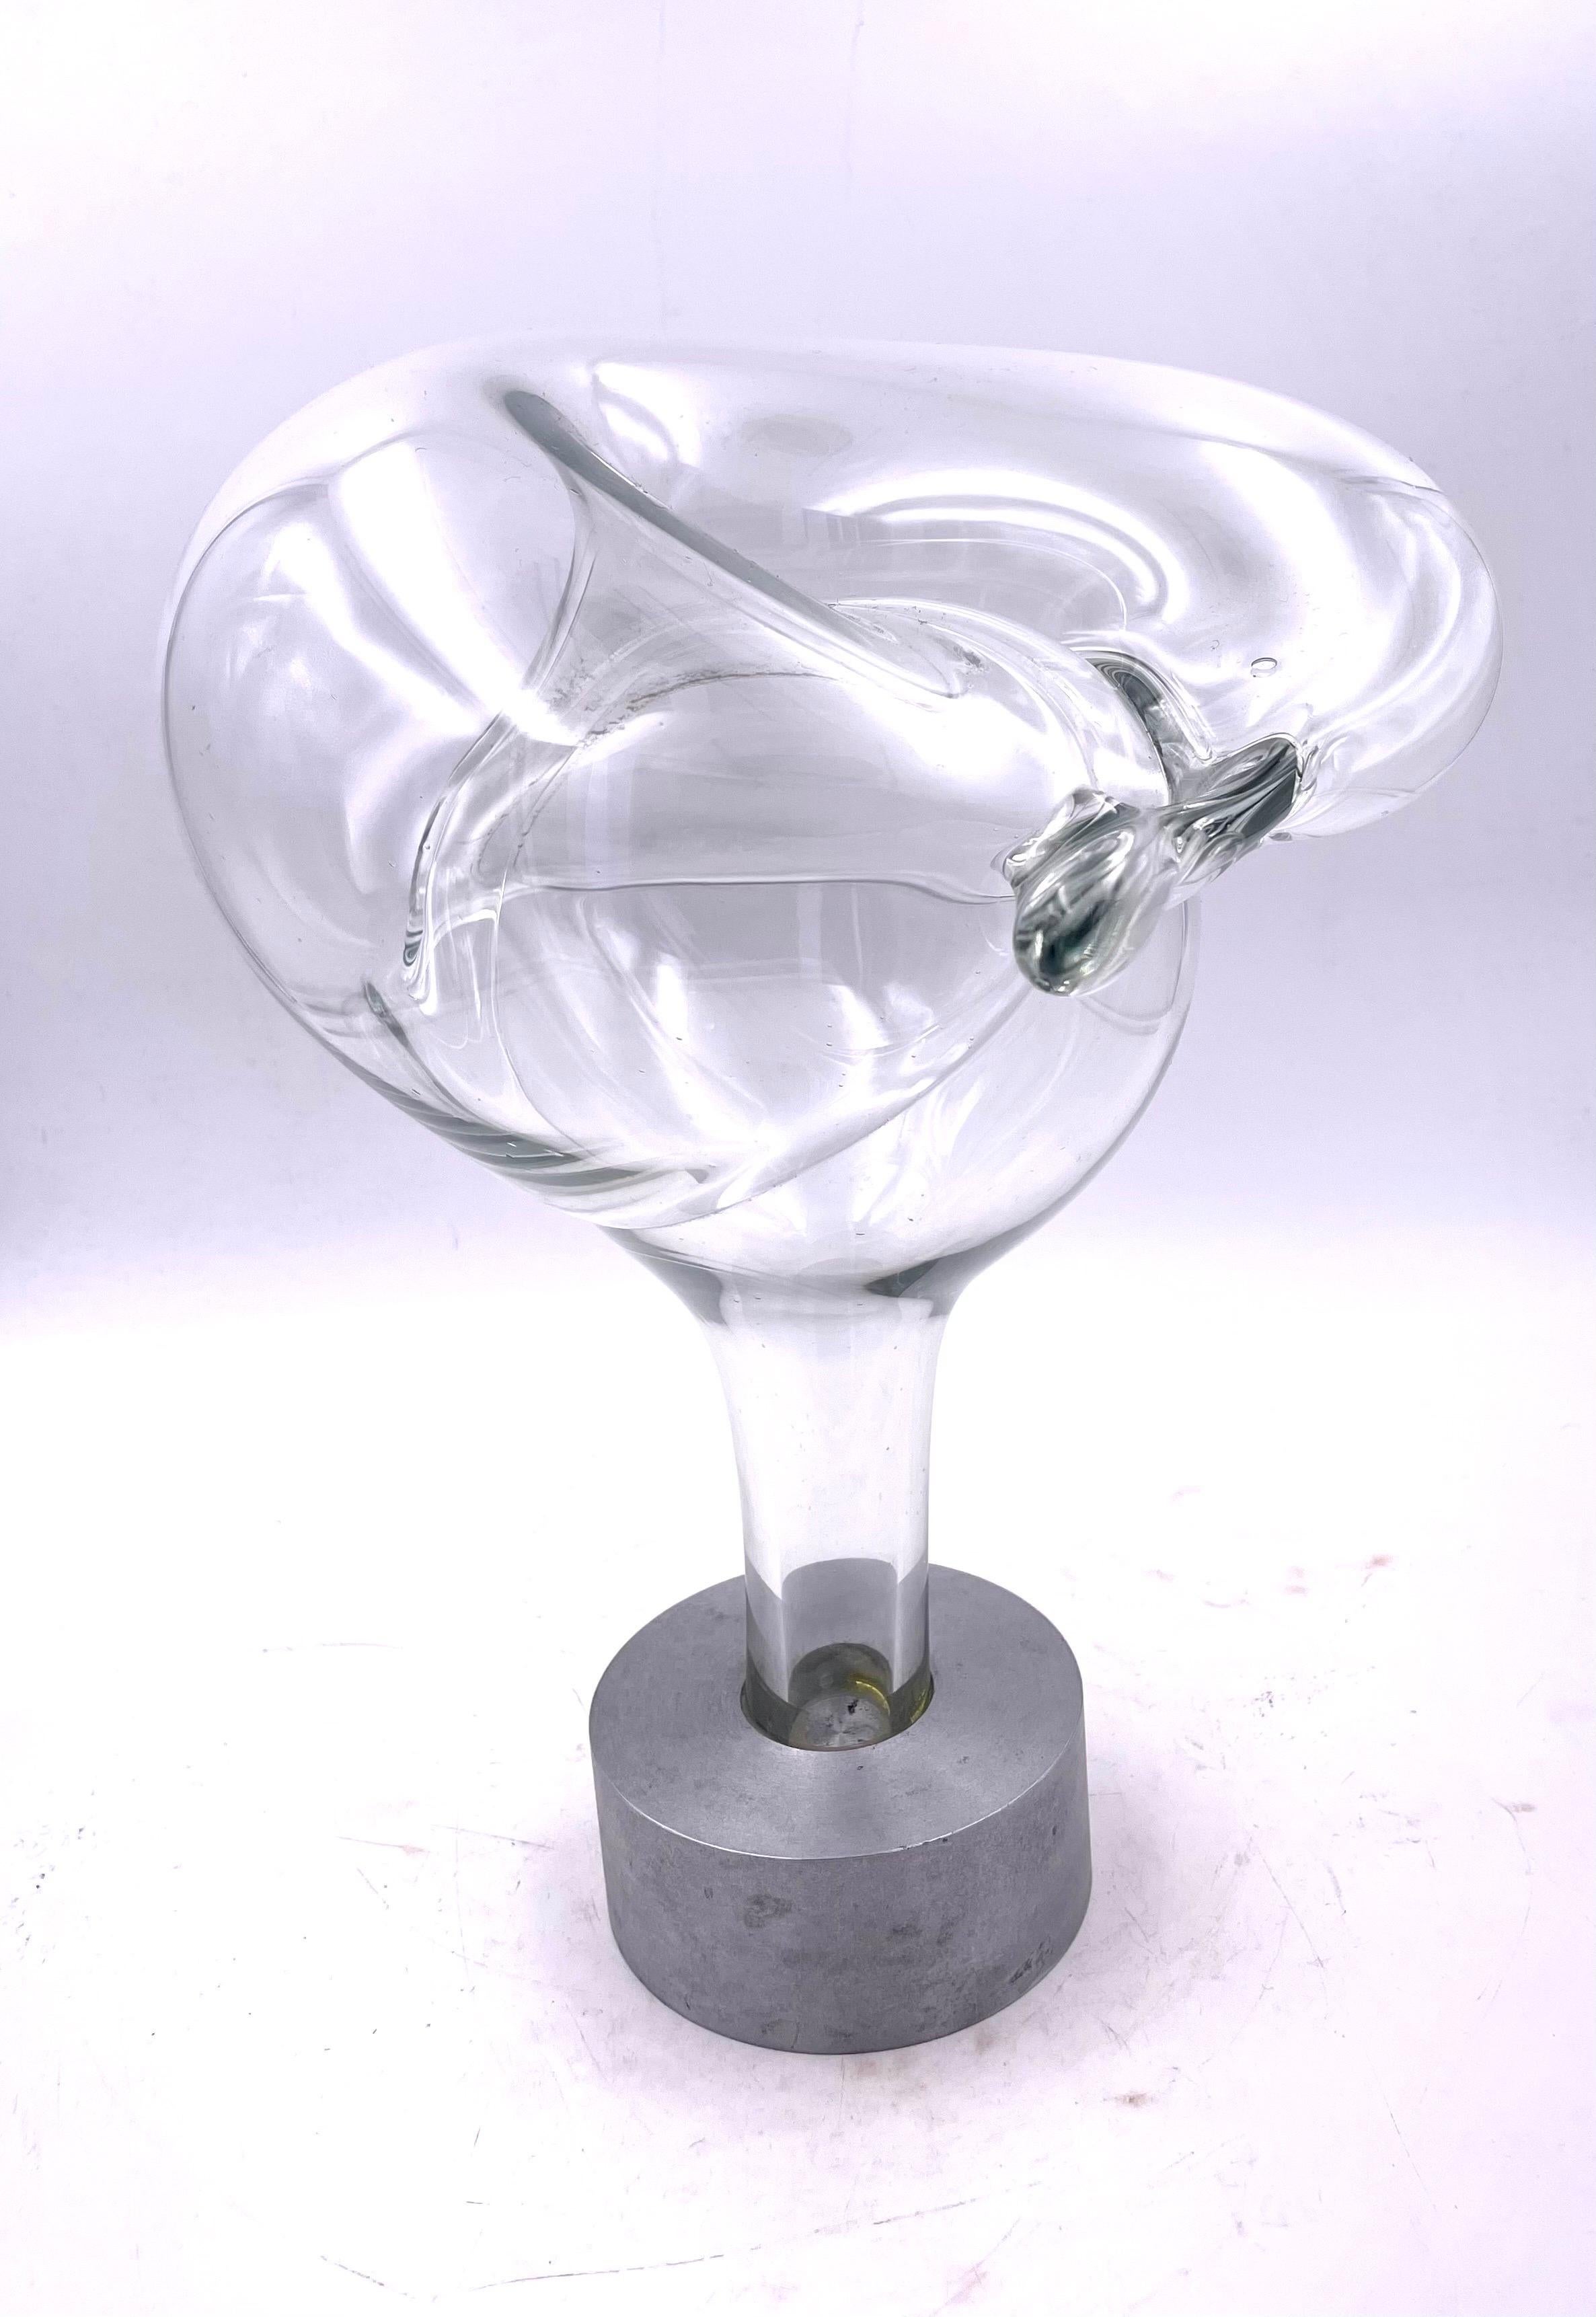 Beautiful and rare signed and dated glass sculpture by John Bingham 1976, rare piece signed and dated at the bottom on a solid aluminum base, no chips or cracks.